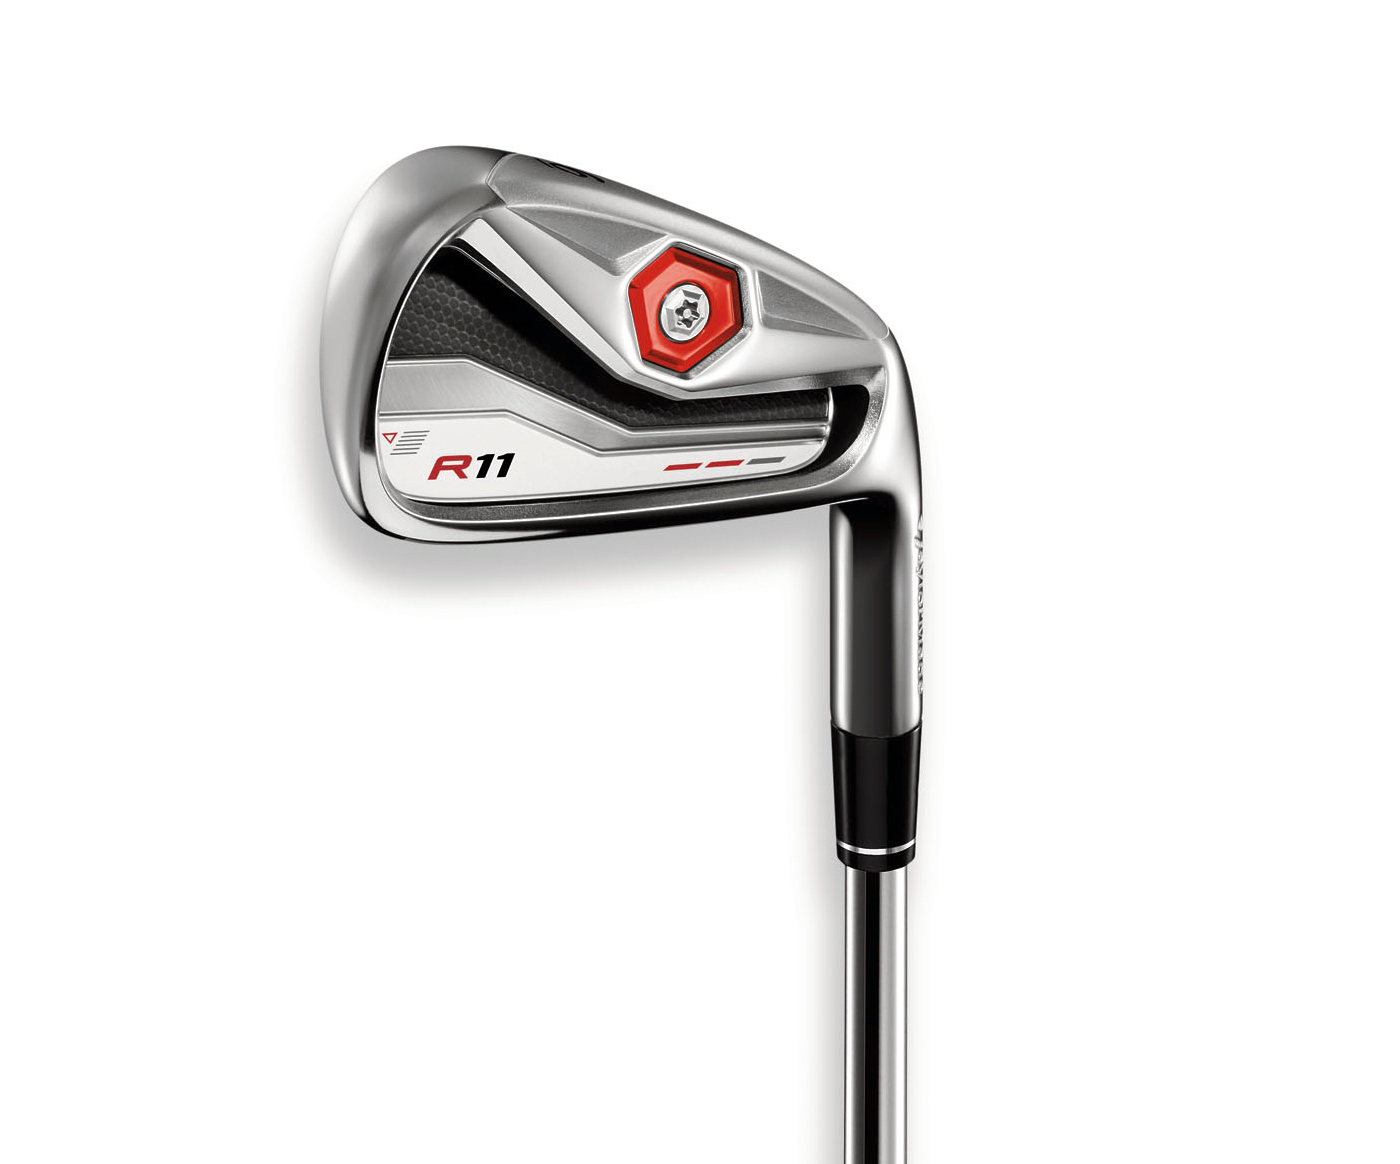 TaylorMade R11 Irons Review